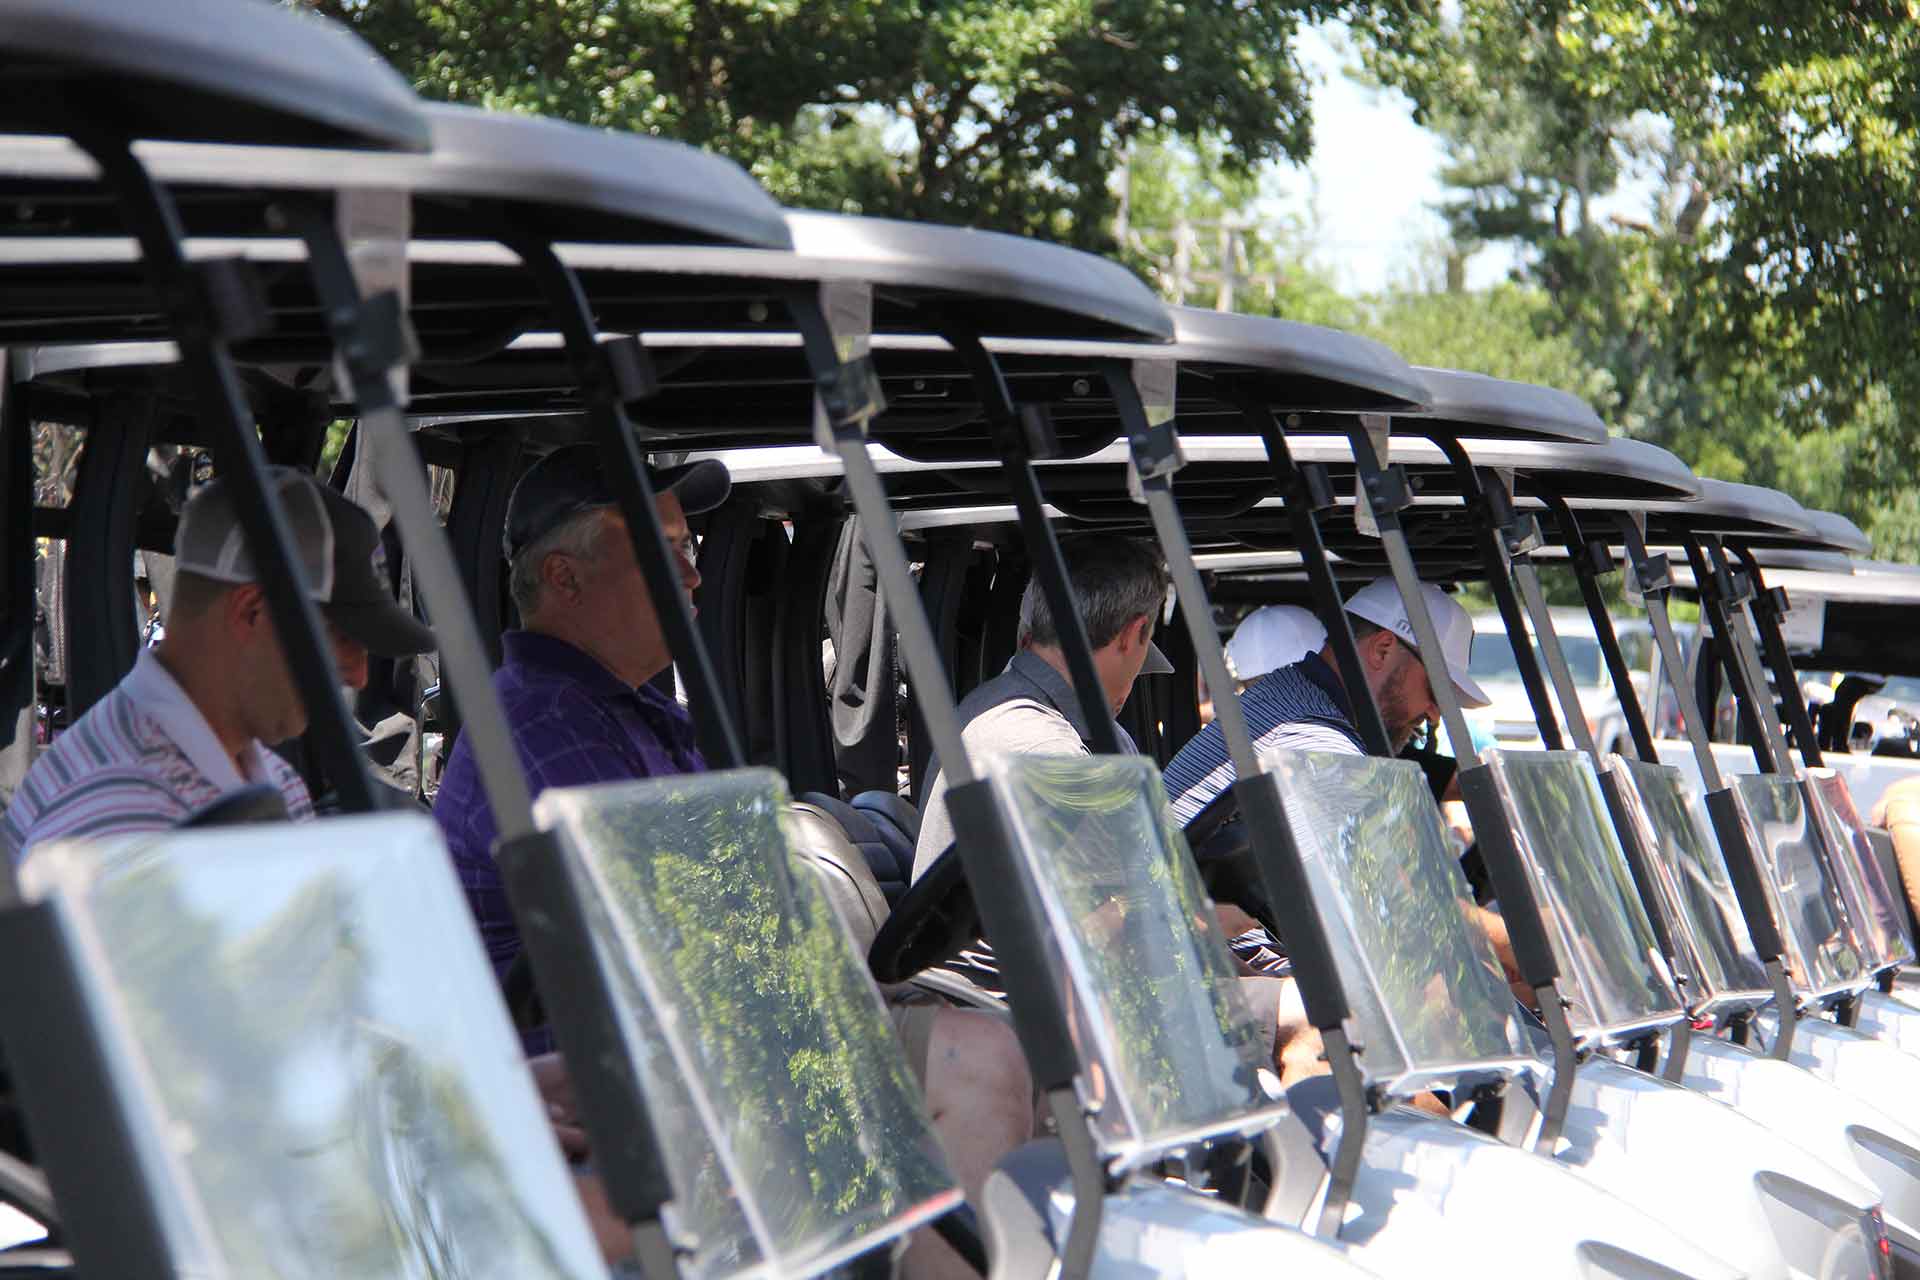 marist-law-association-golf-outing-people-sitting-in-golf-carts